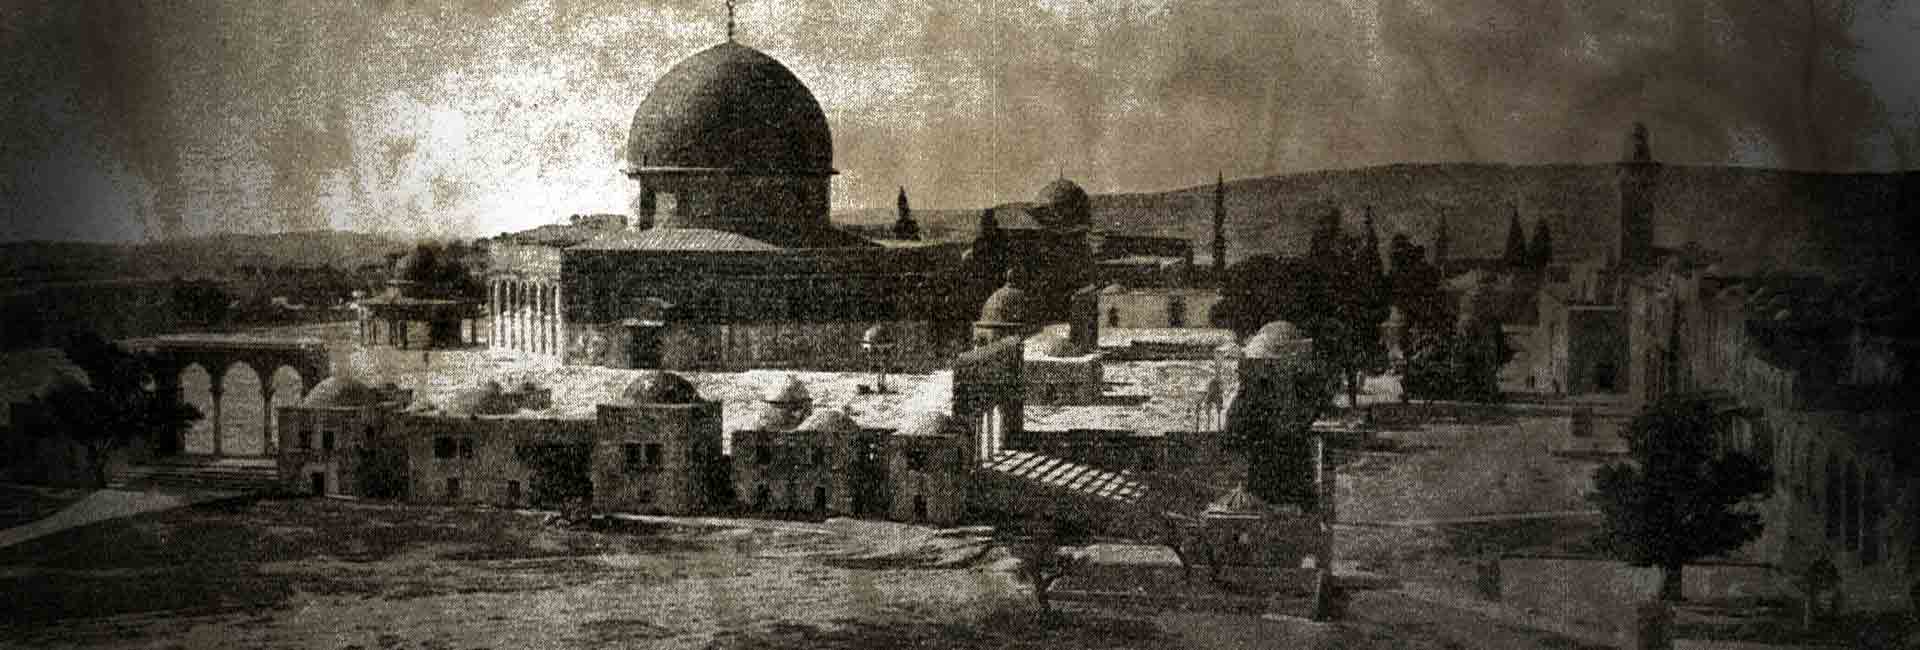 Dome of the Rock